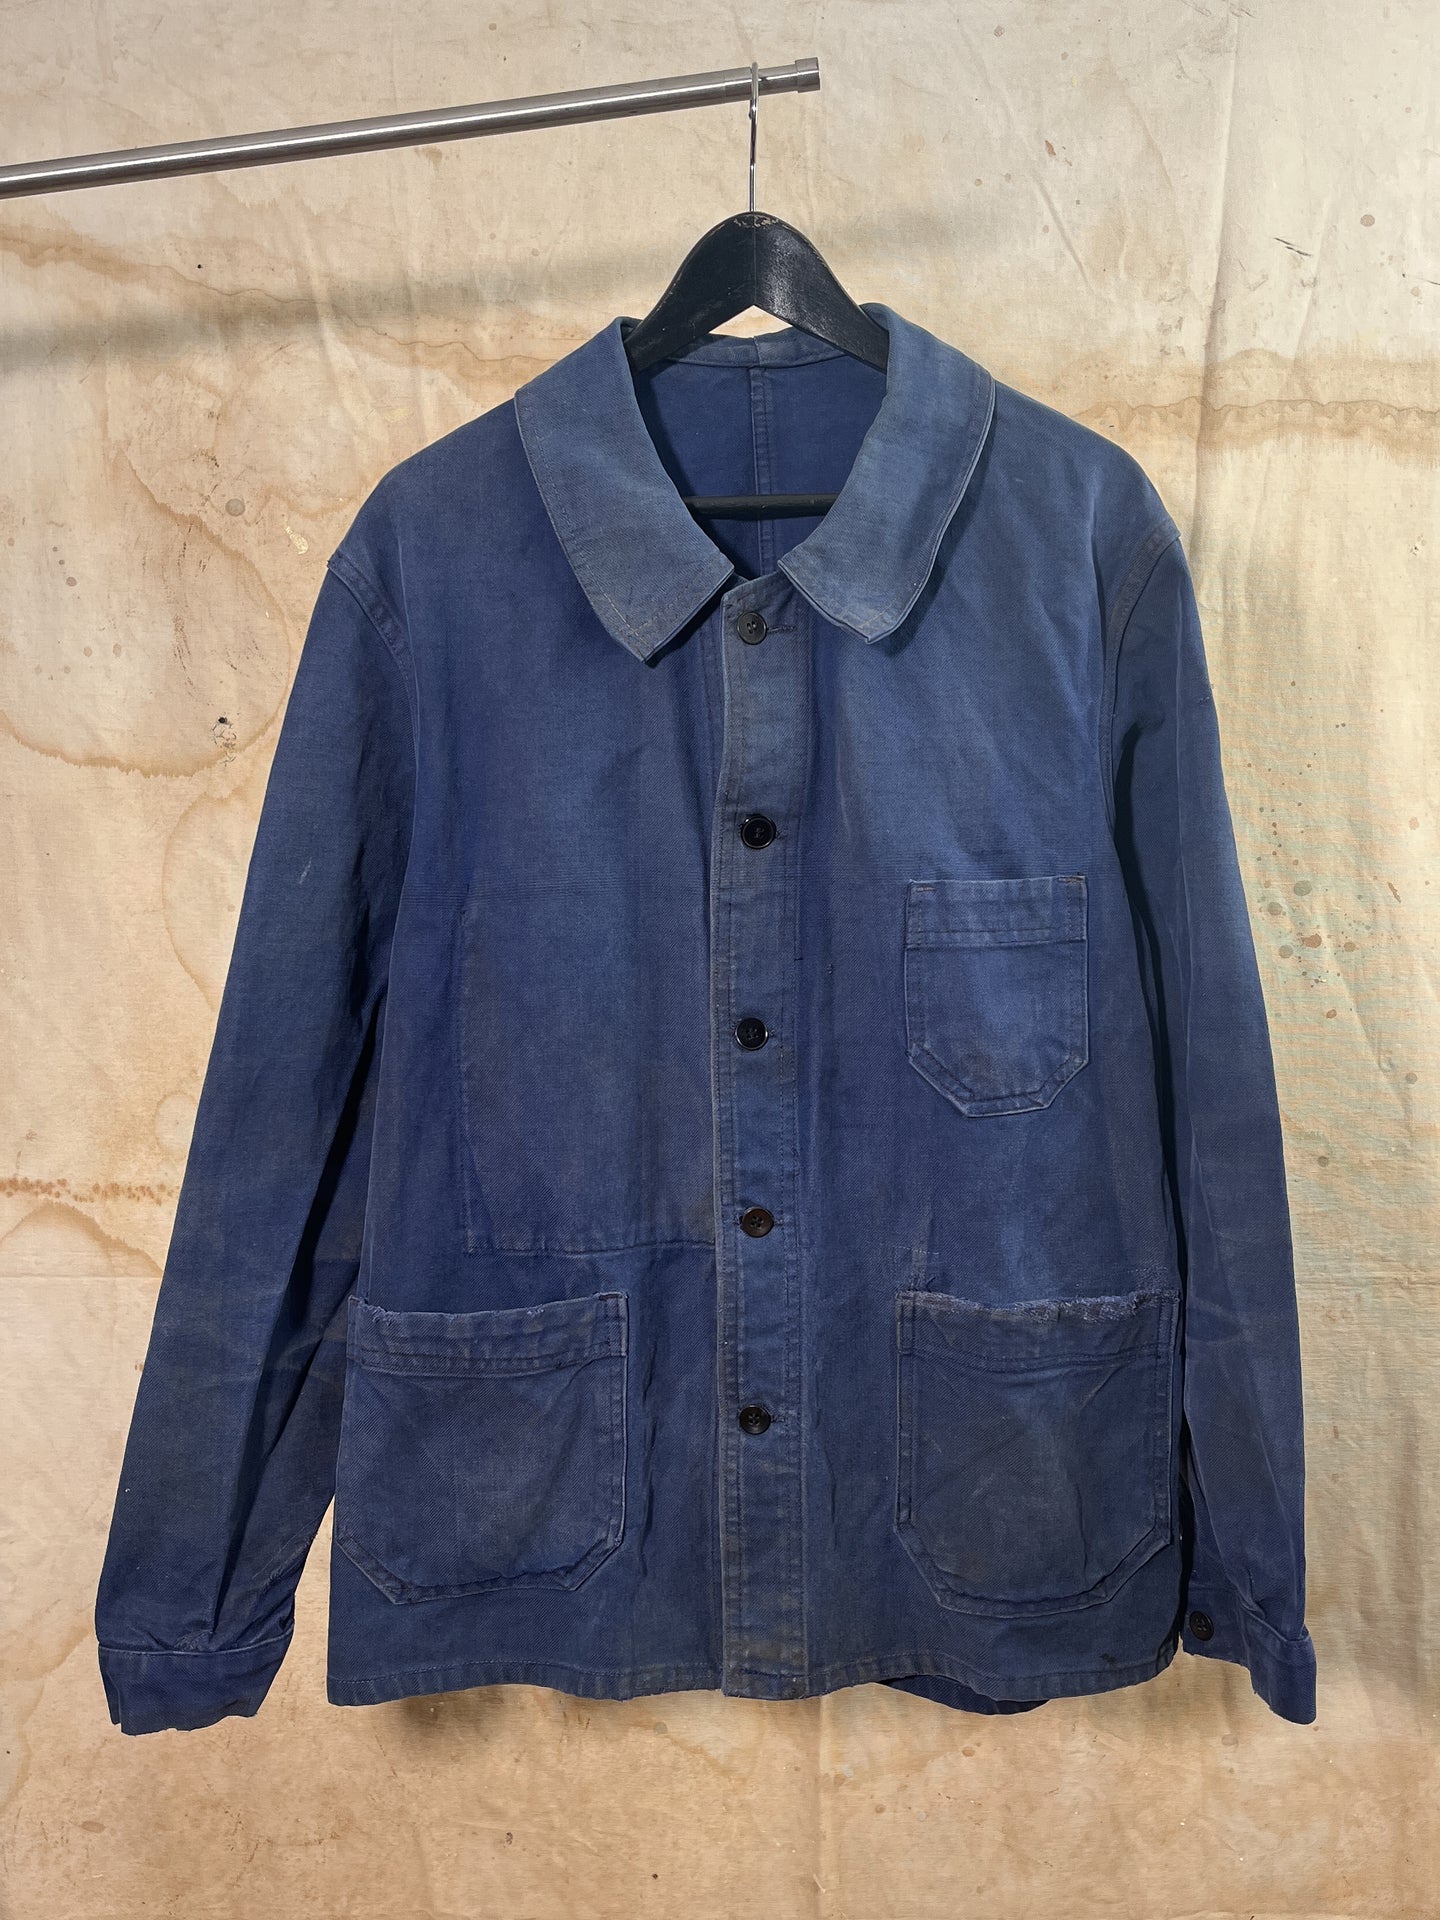 French cotton work jacket by Le Laboureur c. 1970s